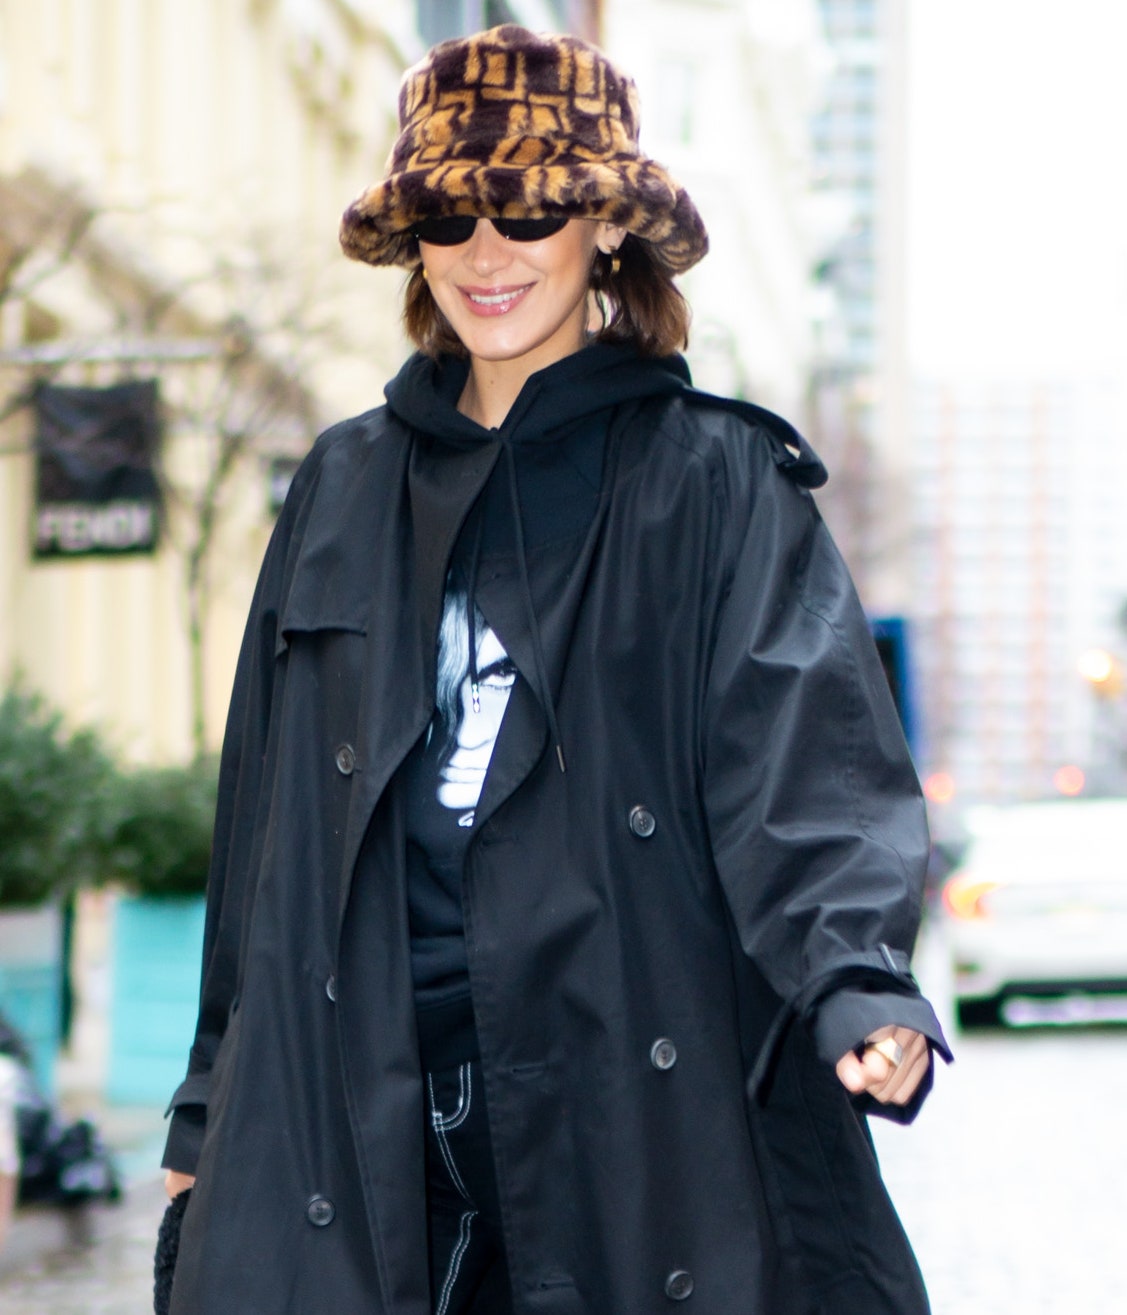 Bella Hadid Is Bringing Back the Fuzzy Bucket Hat | Glamour